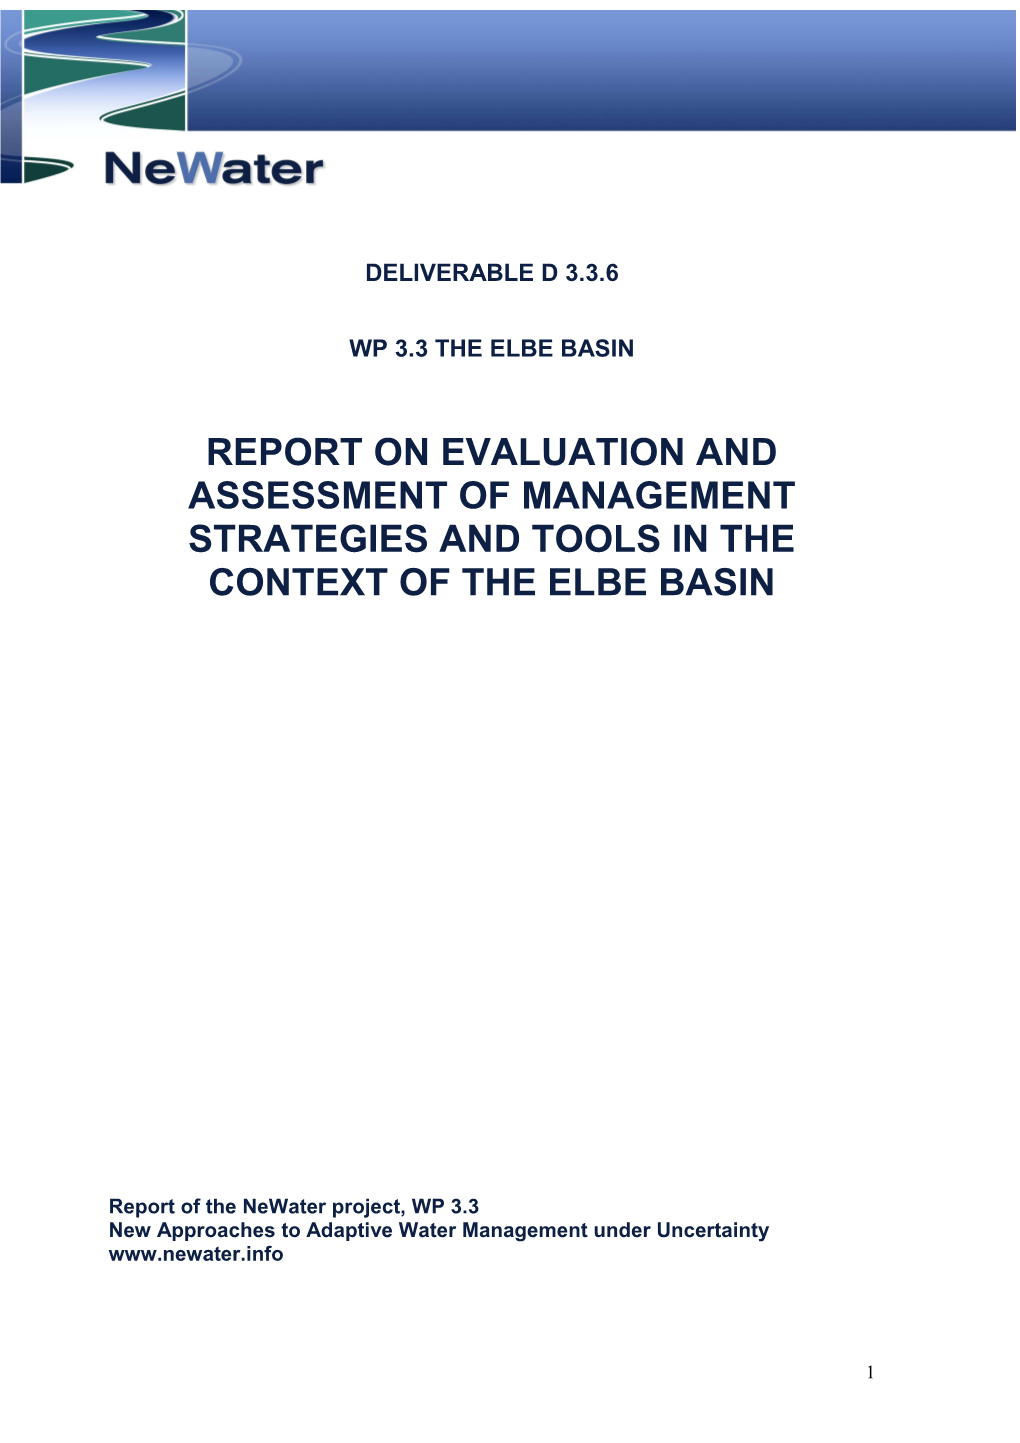 Report on Evaluation and Assessment of Management Strategies and Tools in the Context of the Elbe Basin